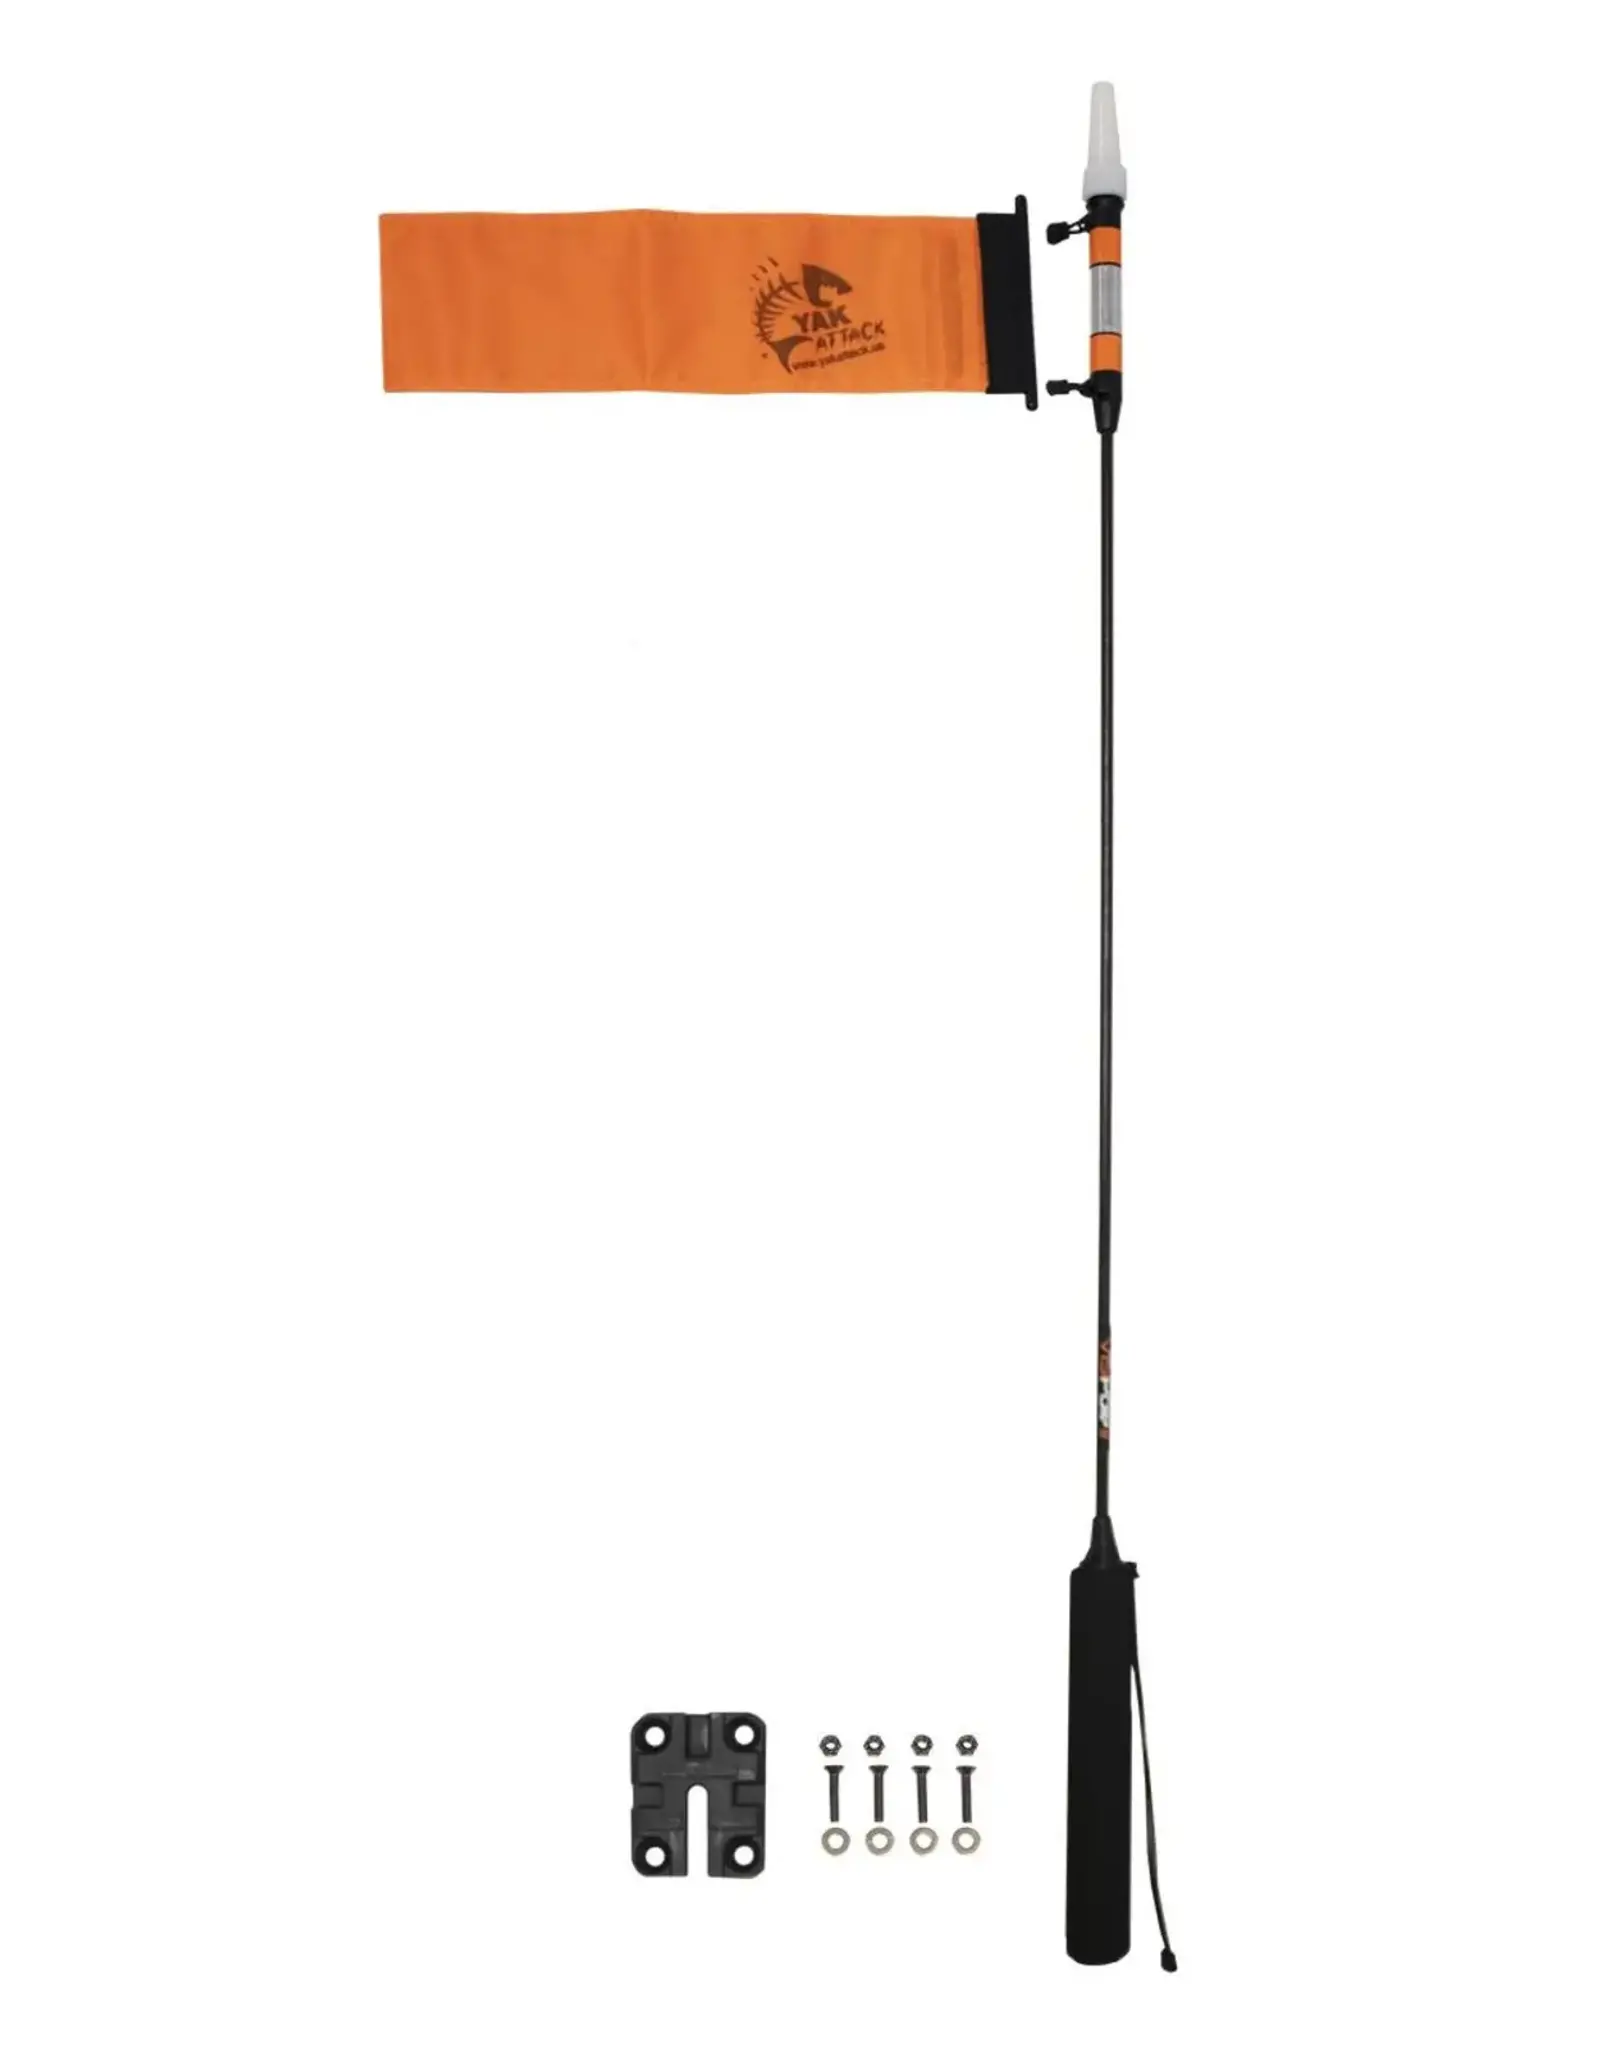 YakAttack VISIpole II, Light, mast, floating base, Includes Mighty Mount, Includes flag